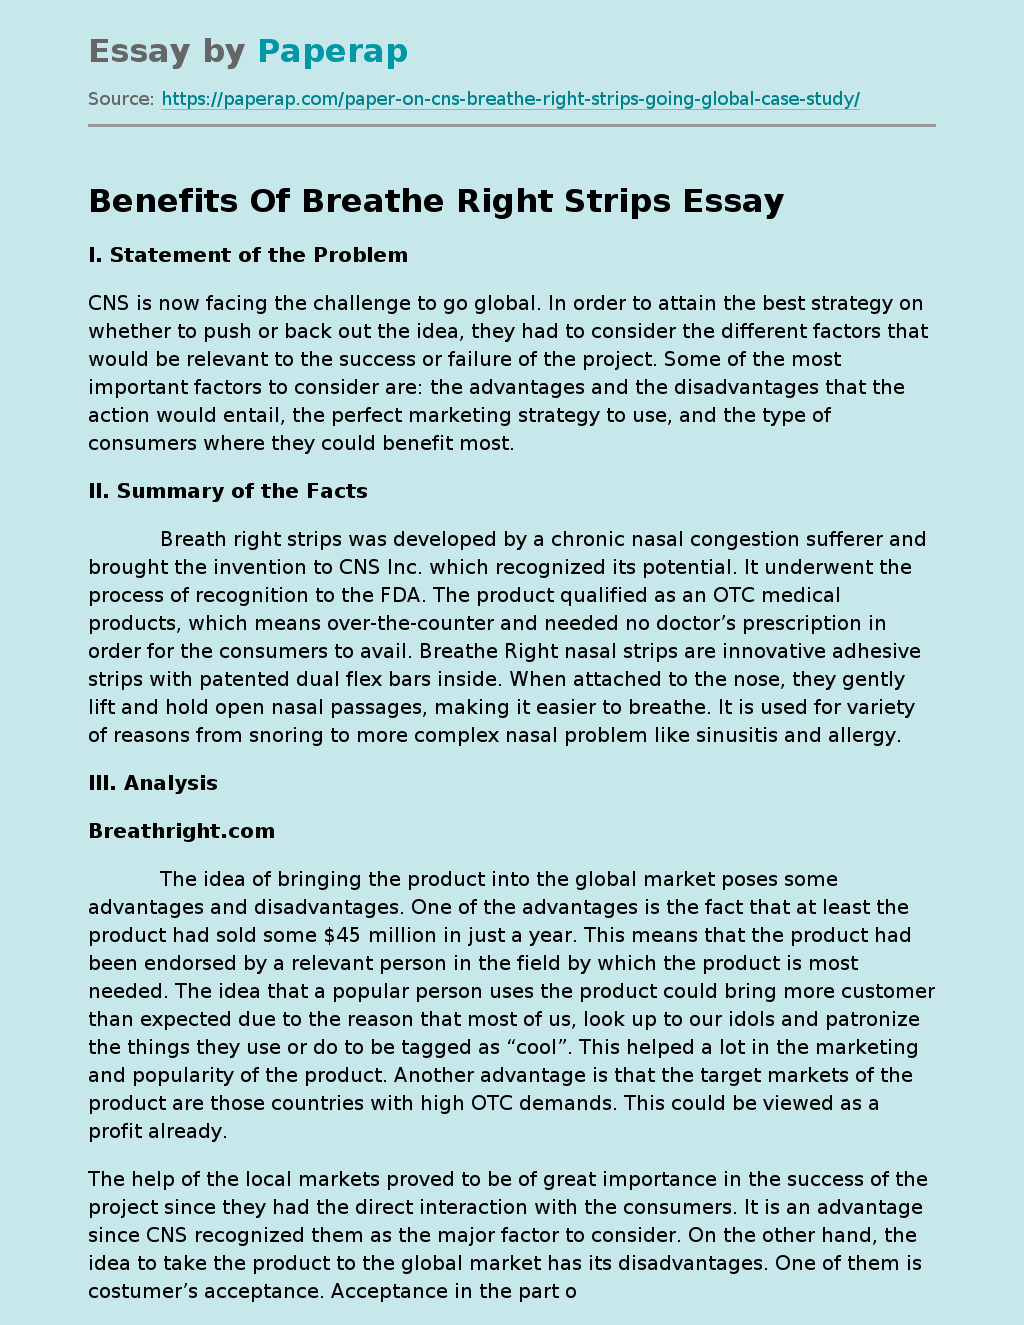 Benefits of Breathe Right Strips